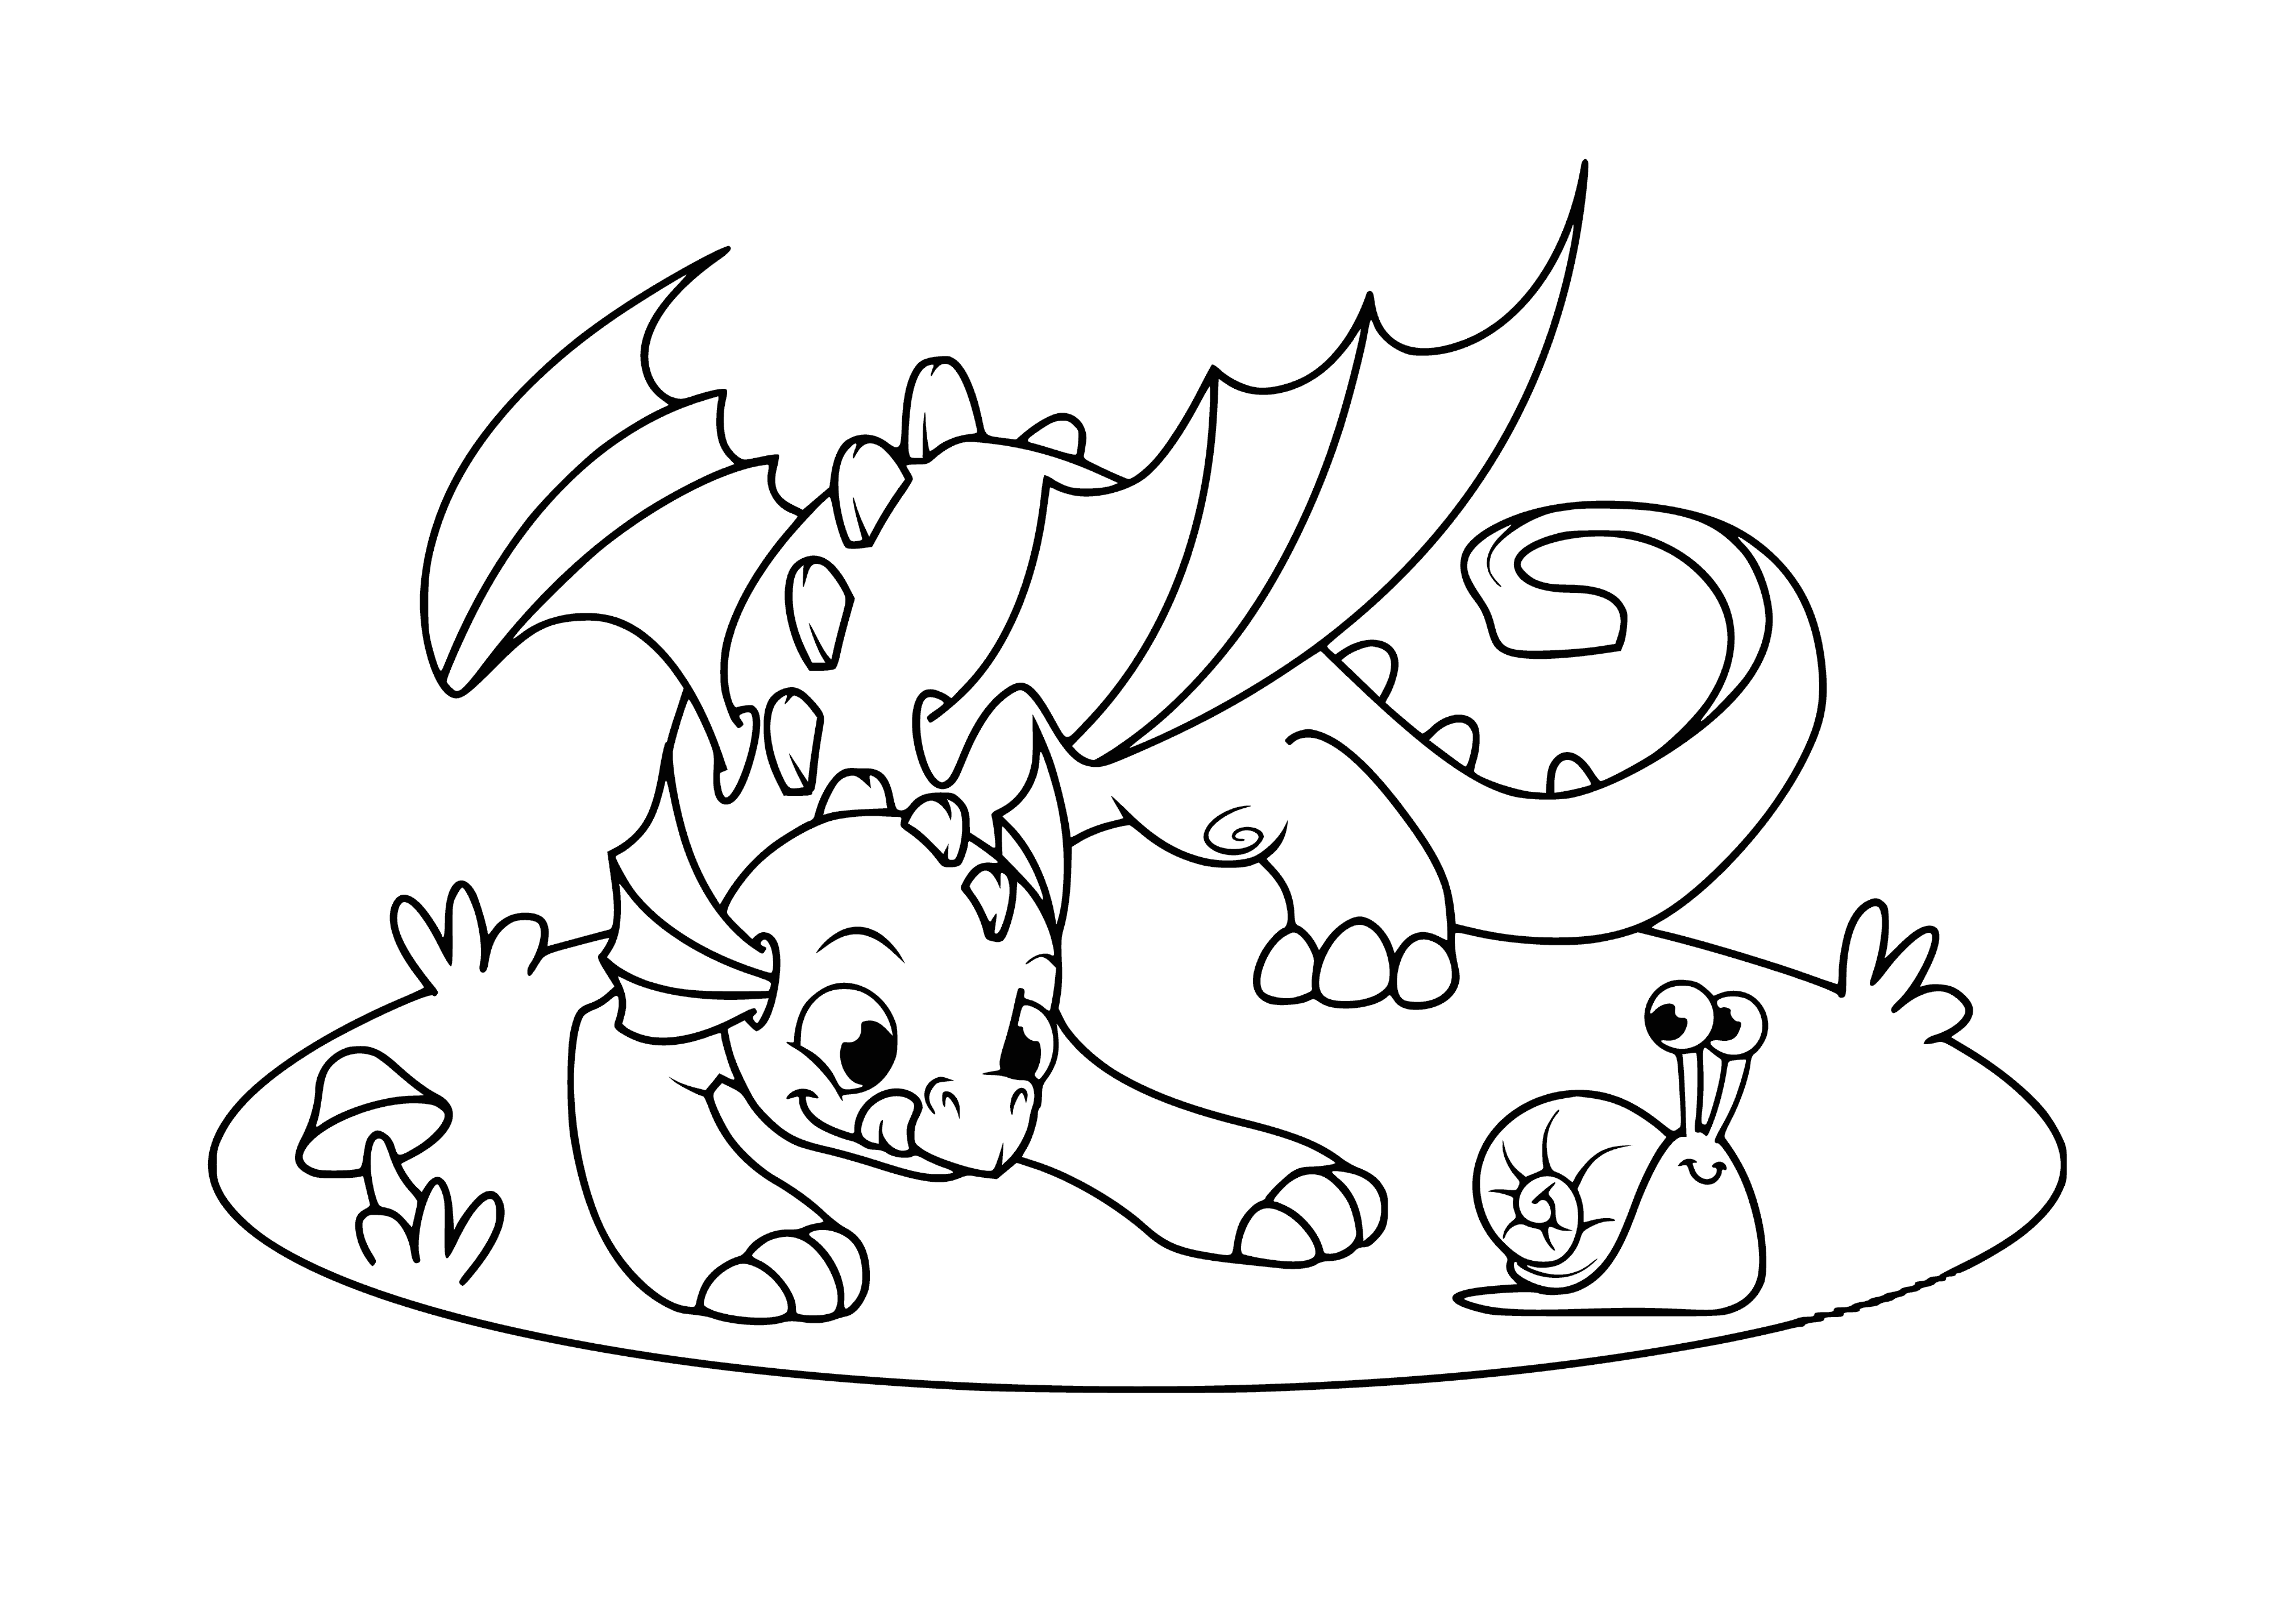 The little dragon plays with a snail coloring page